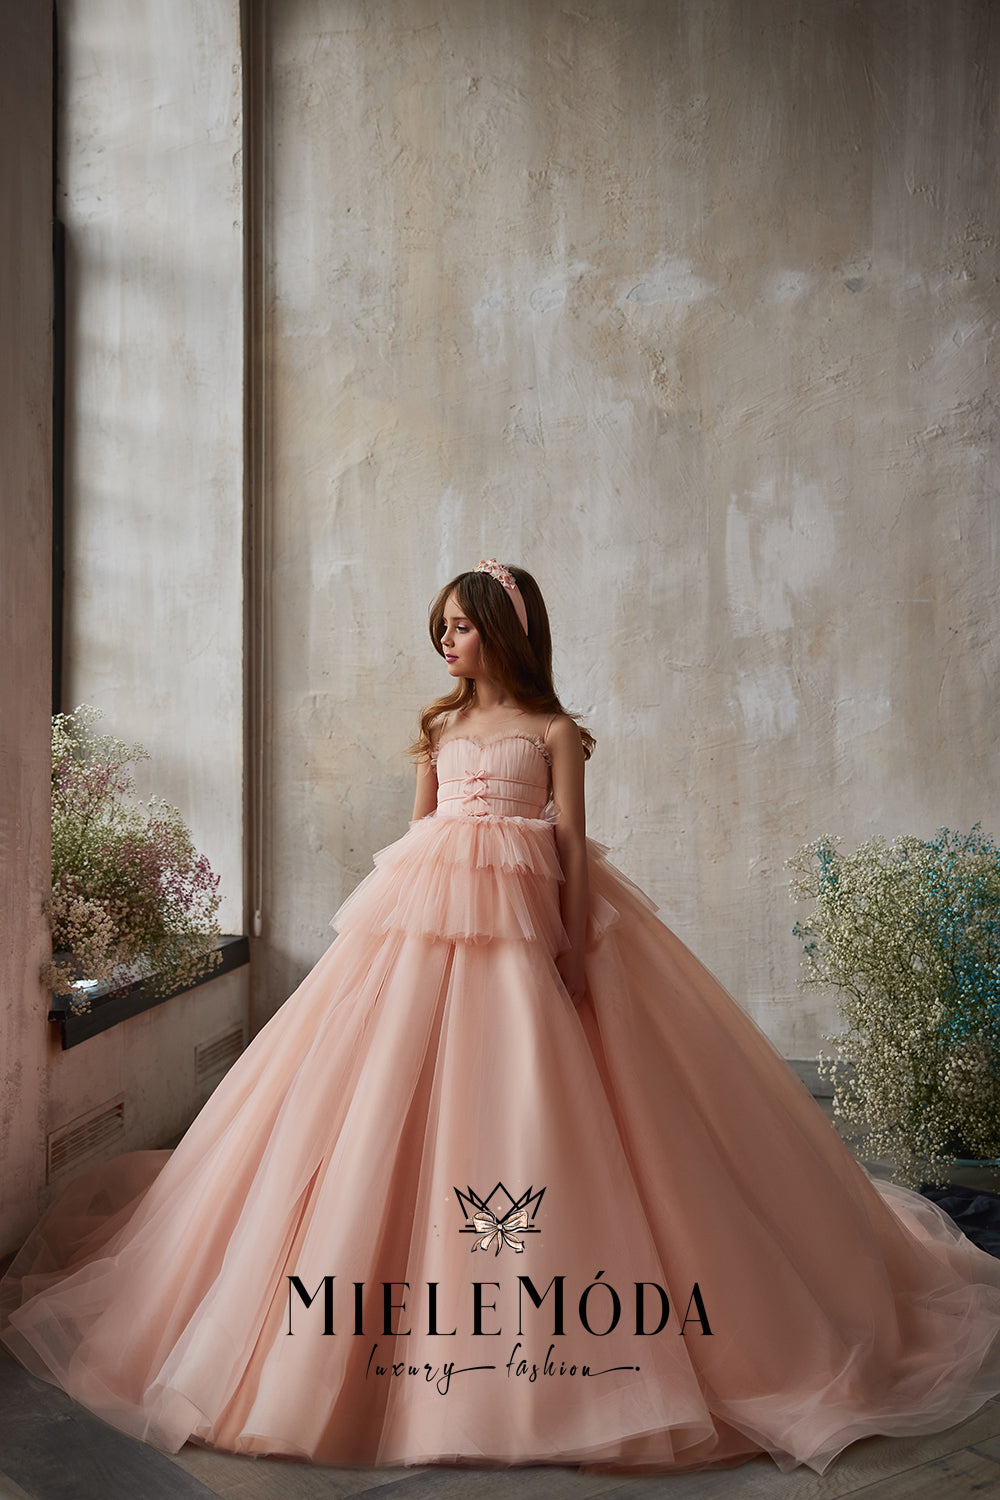 young girl with long dark hair wearing pink ballroom gown modeling for miele moda luxury fashion boutique